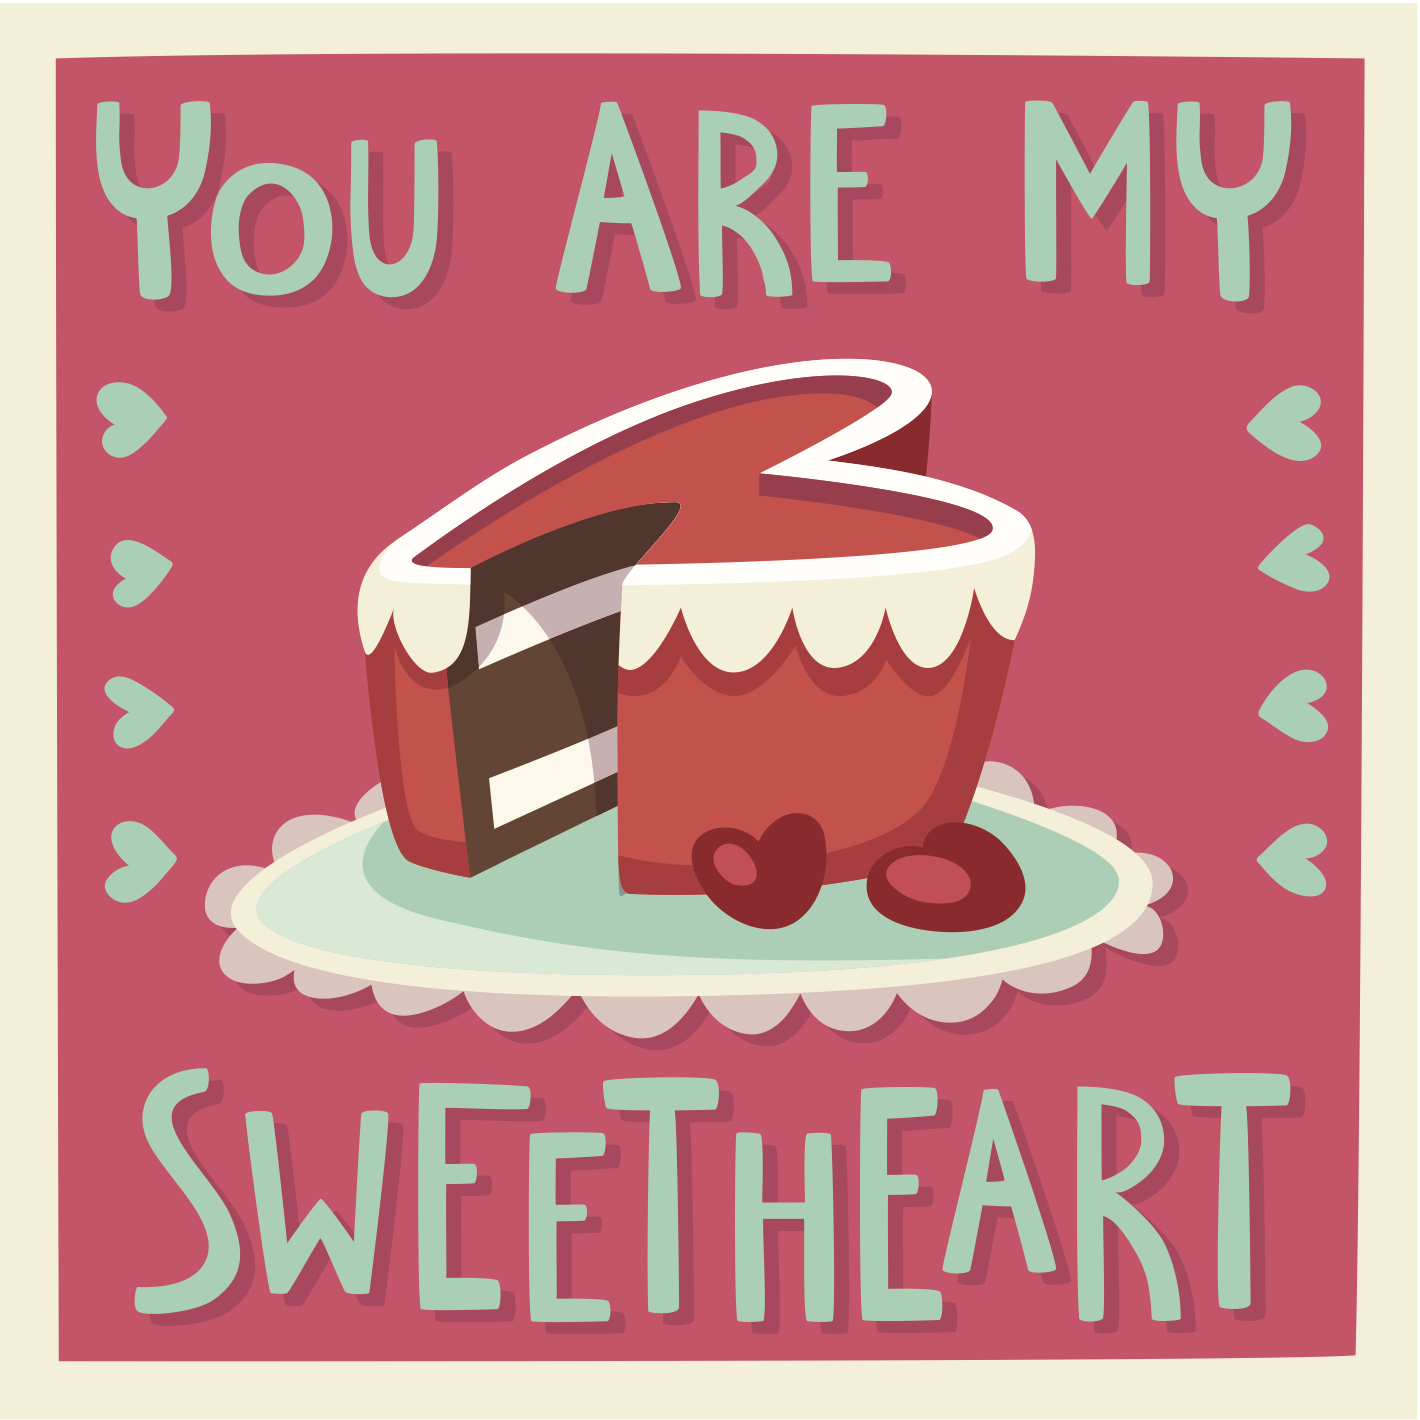 Valentine's Day eCard with a heart shaped cake